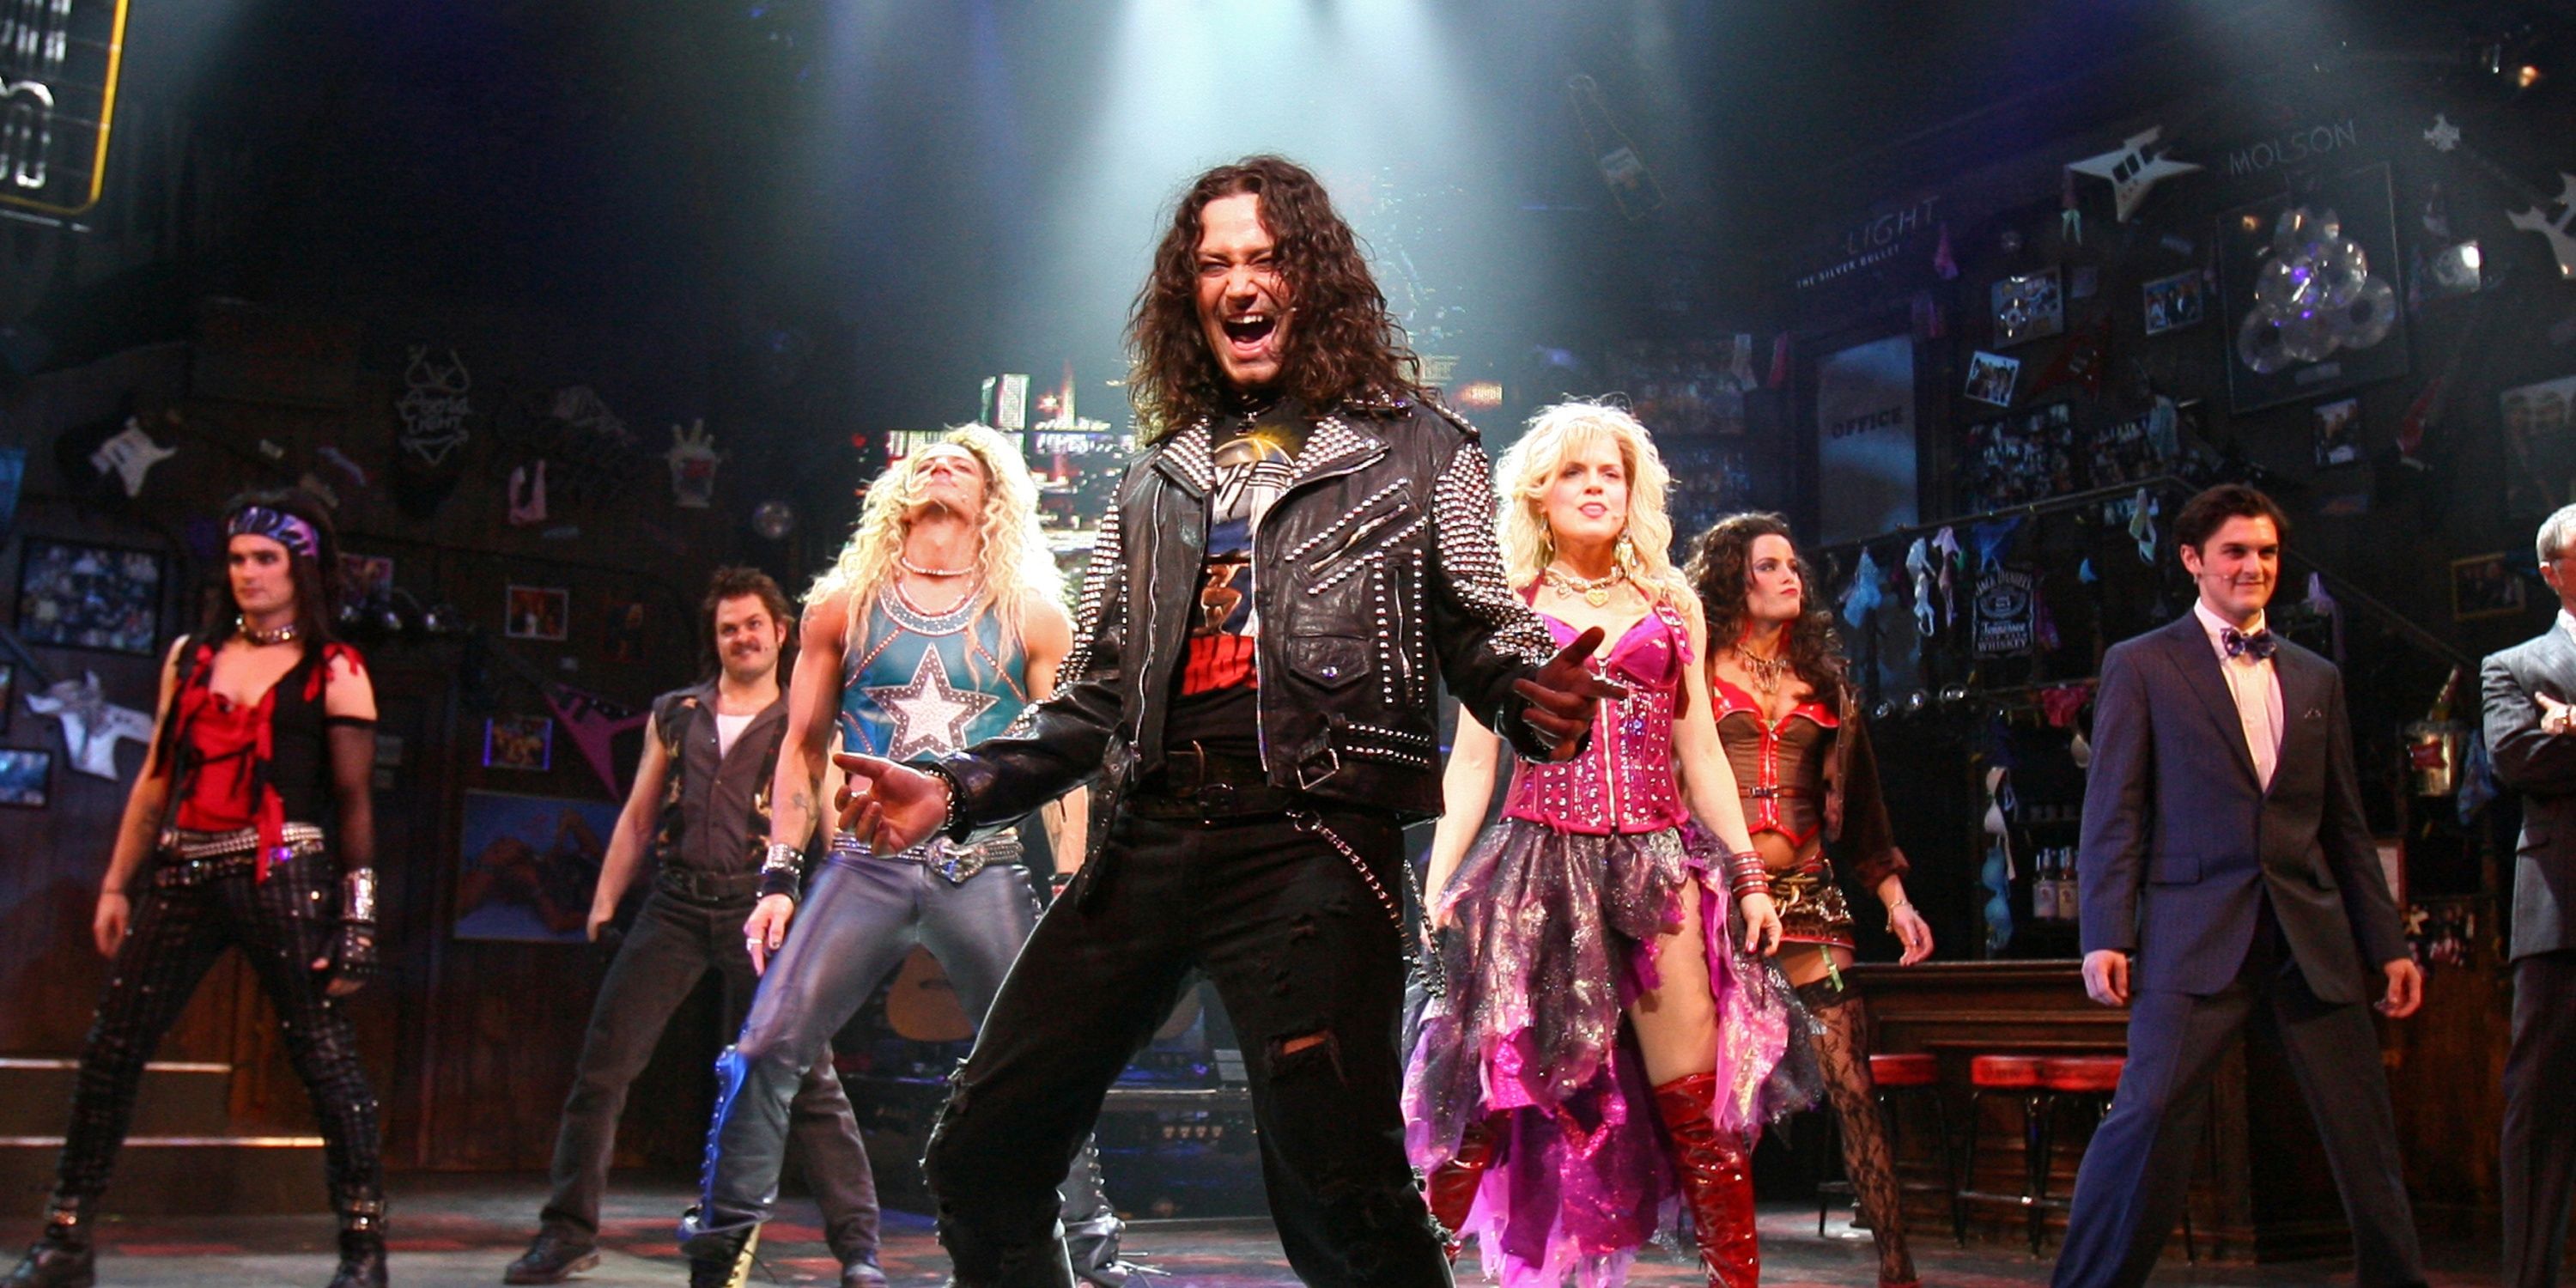 Constantine Maroulis as Drew in Rock of Ages